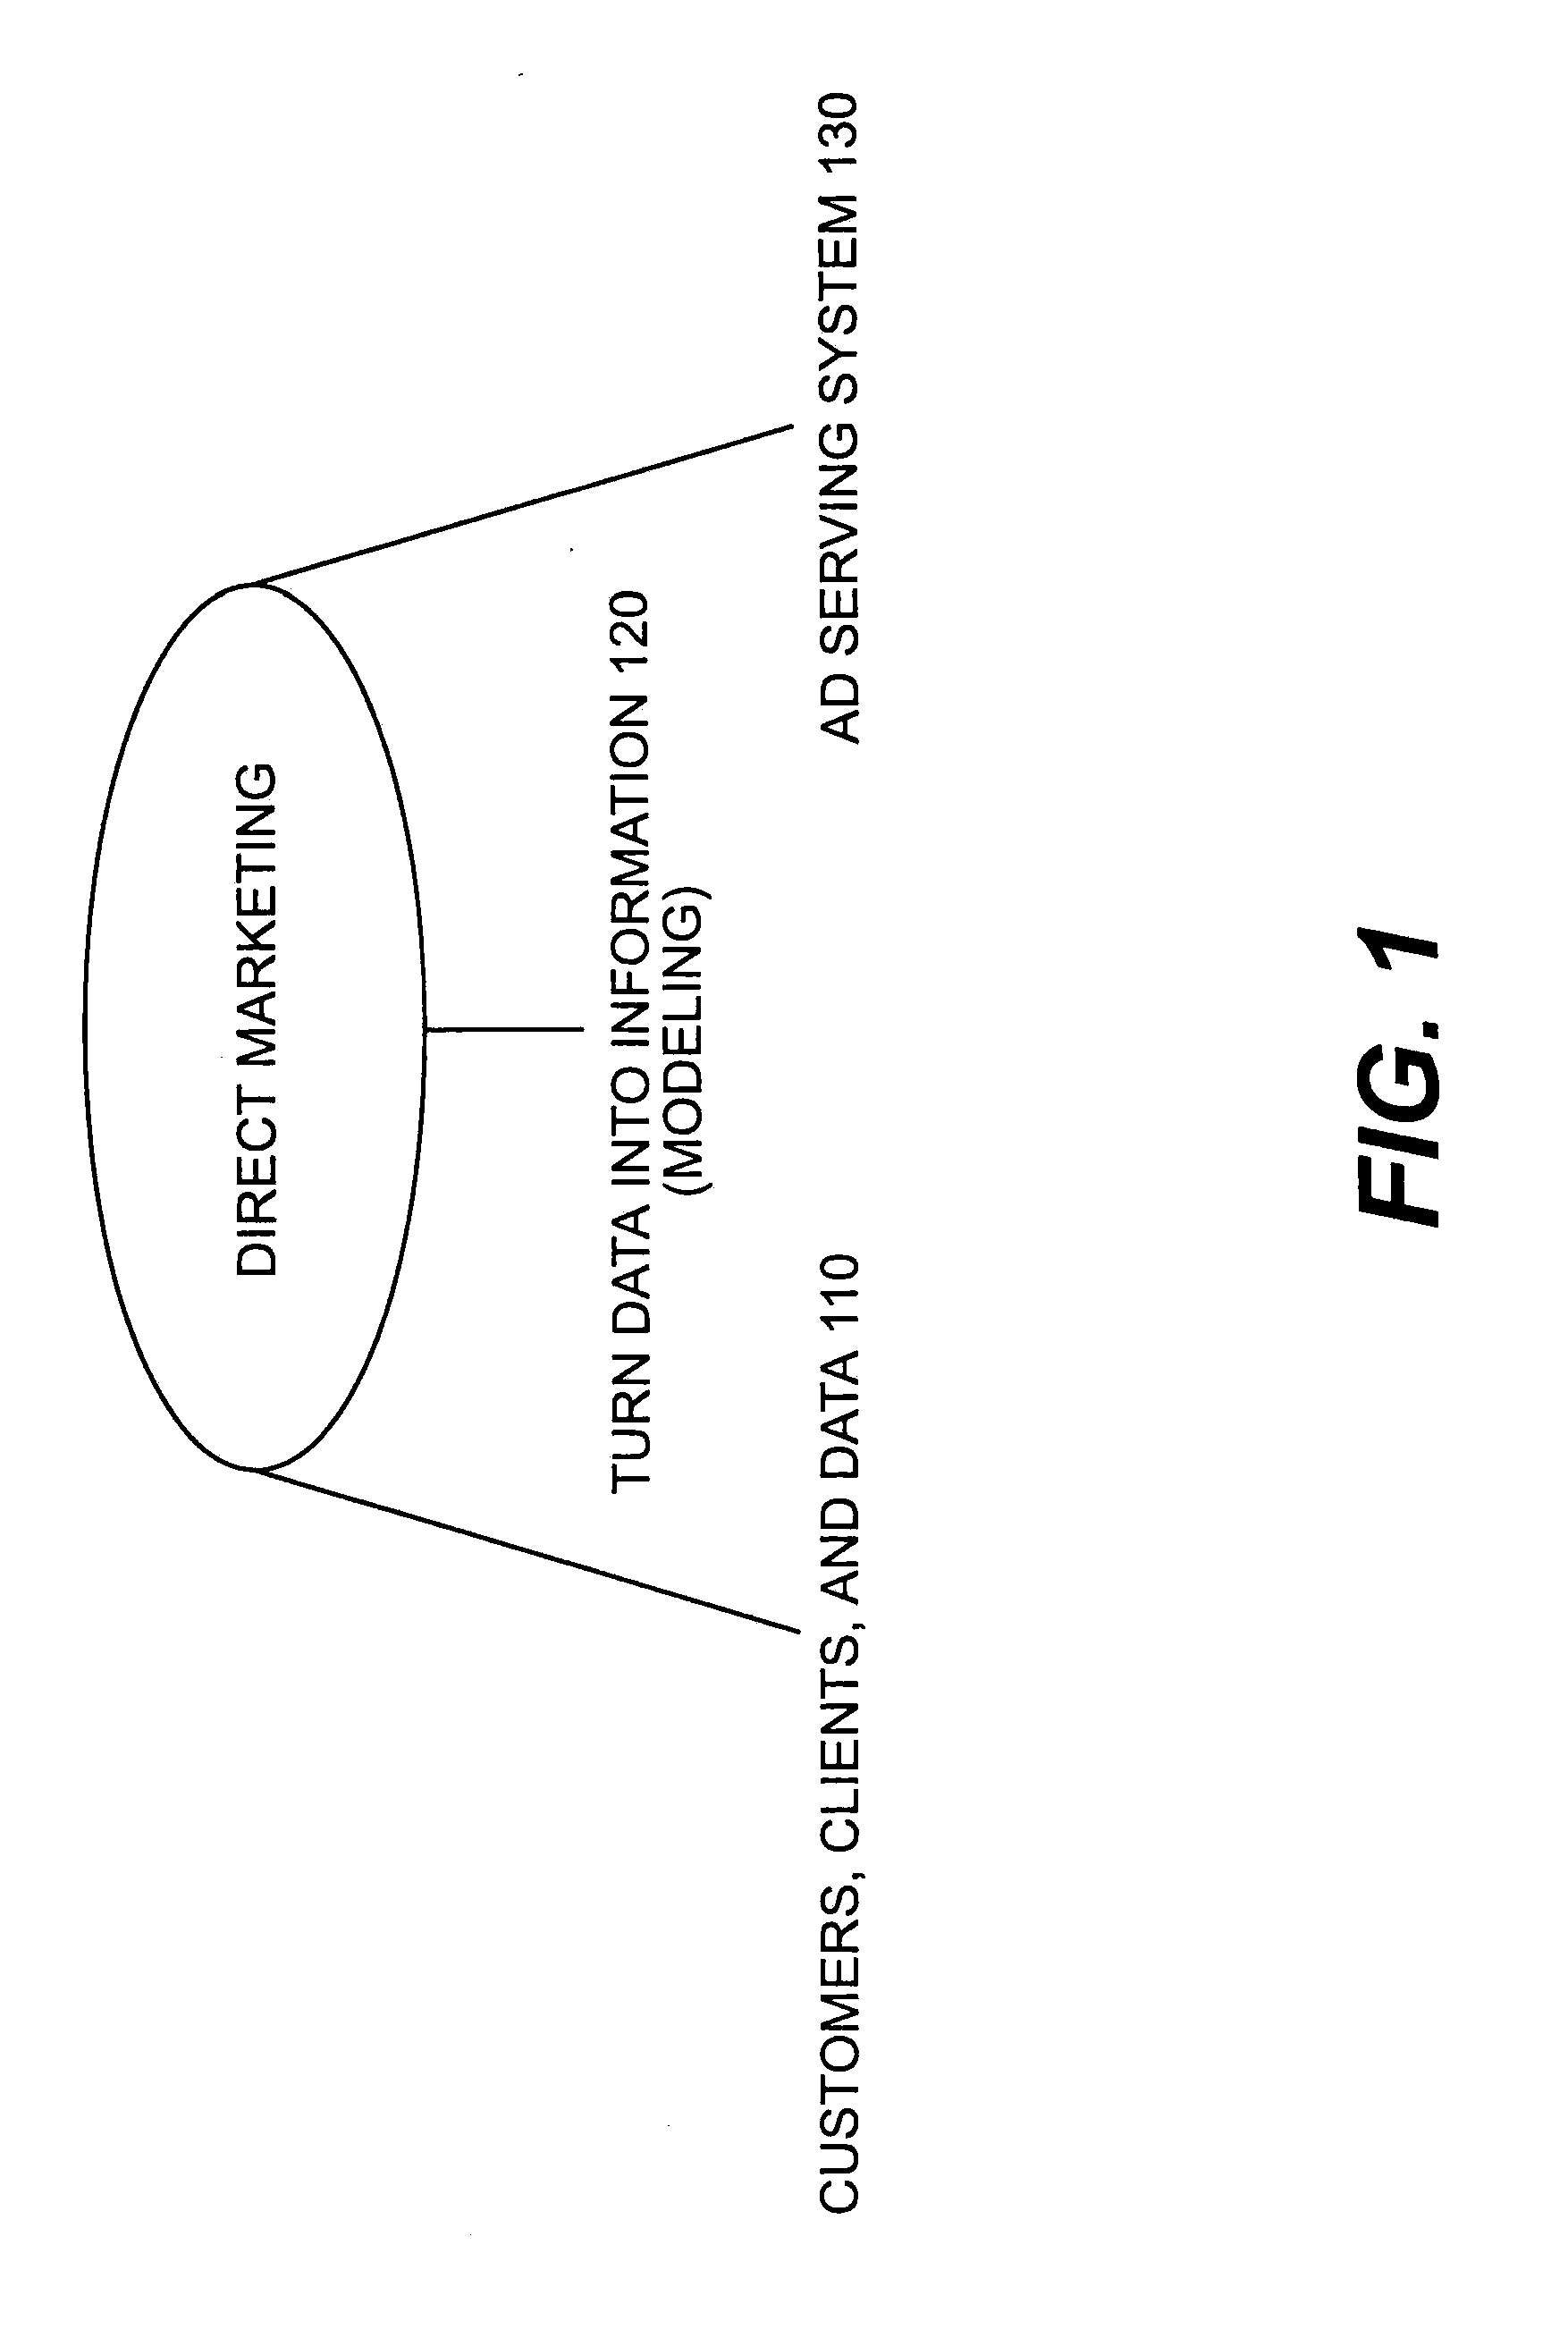 Systems and methods for placing electronic advertisements